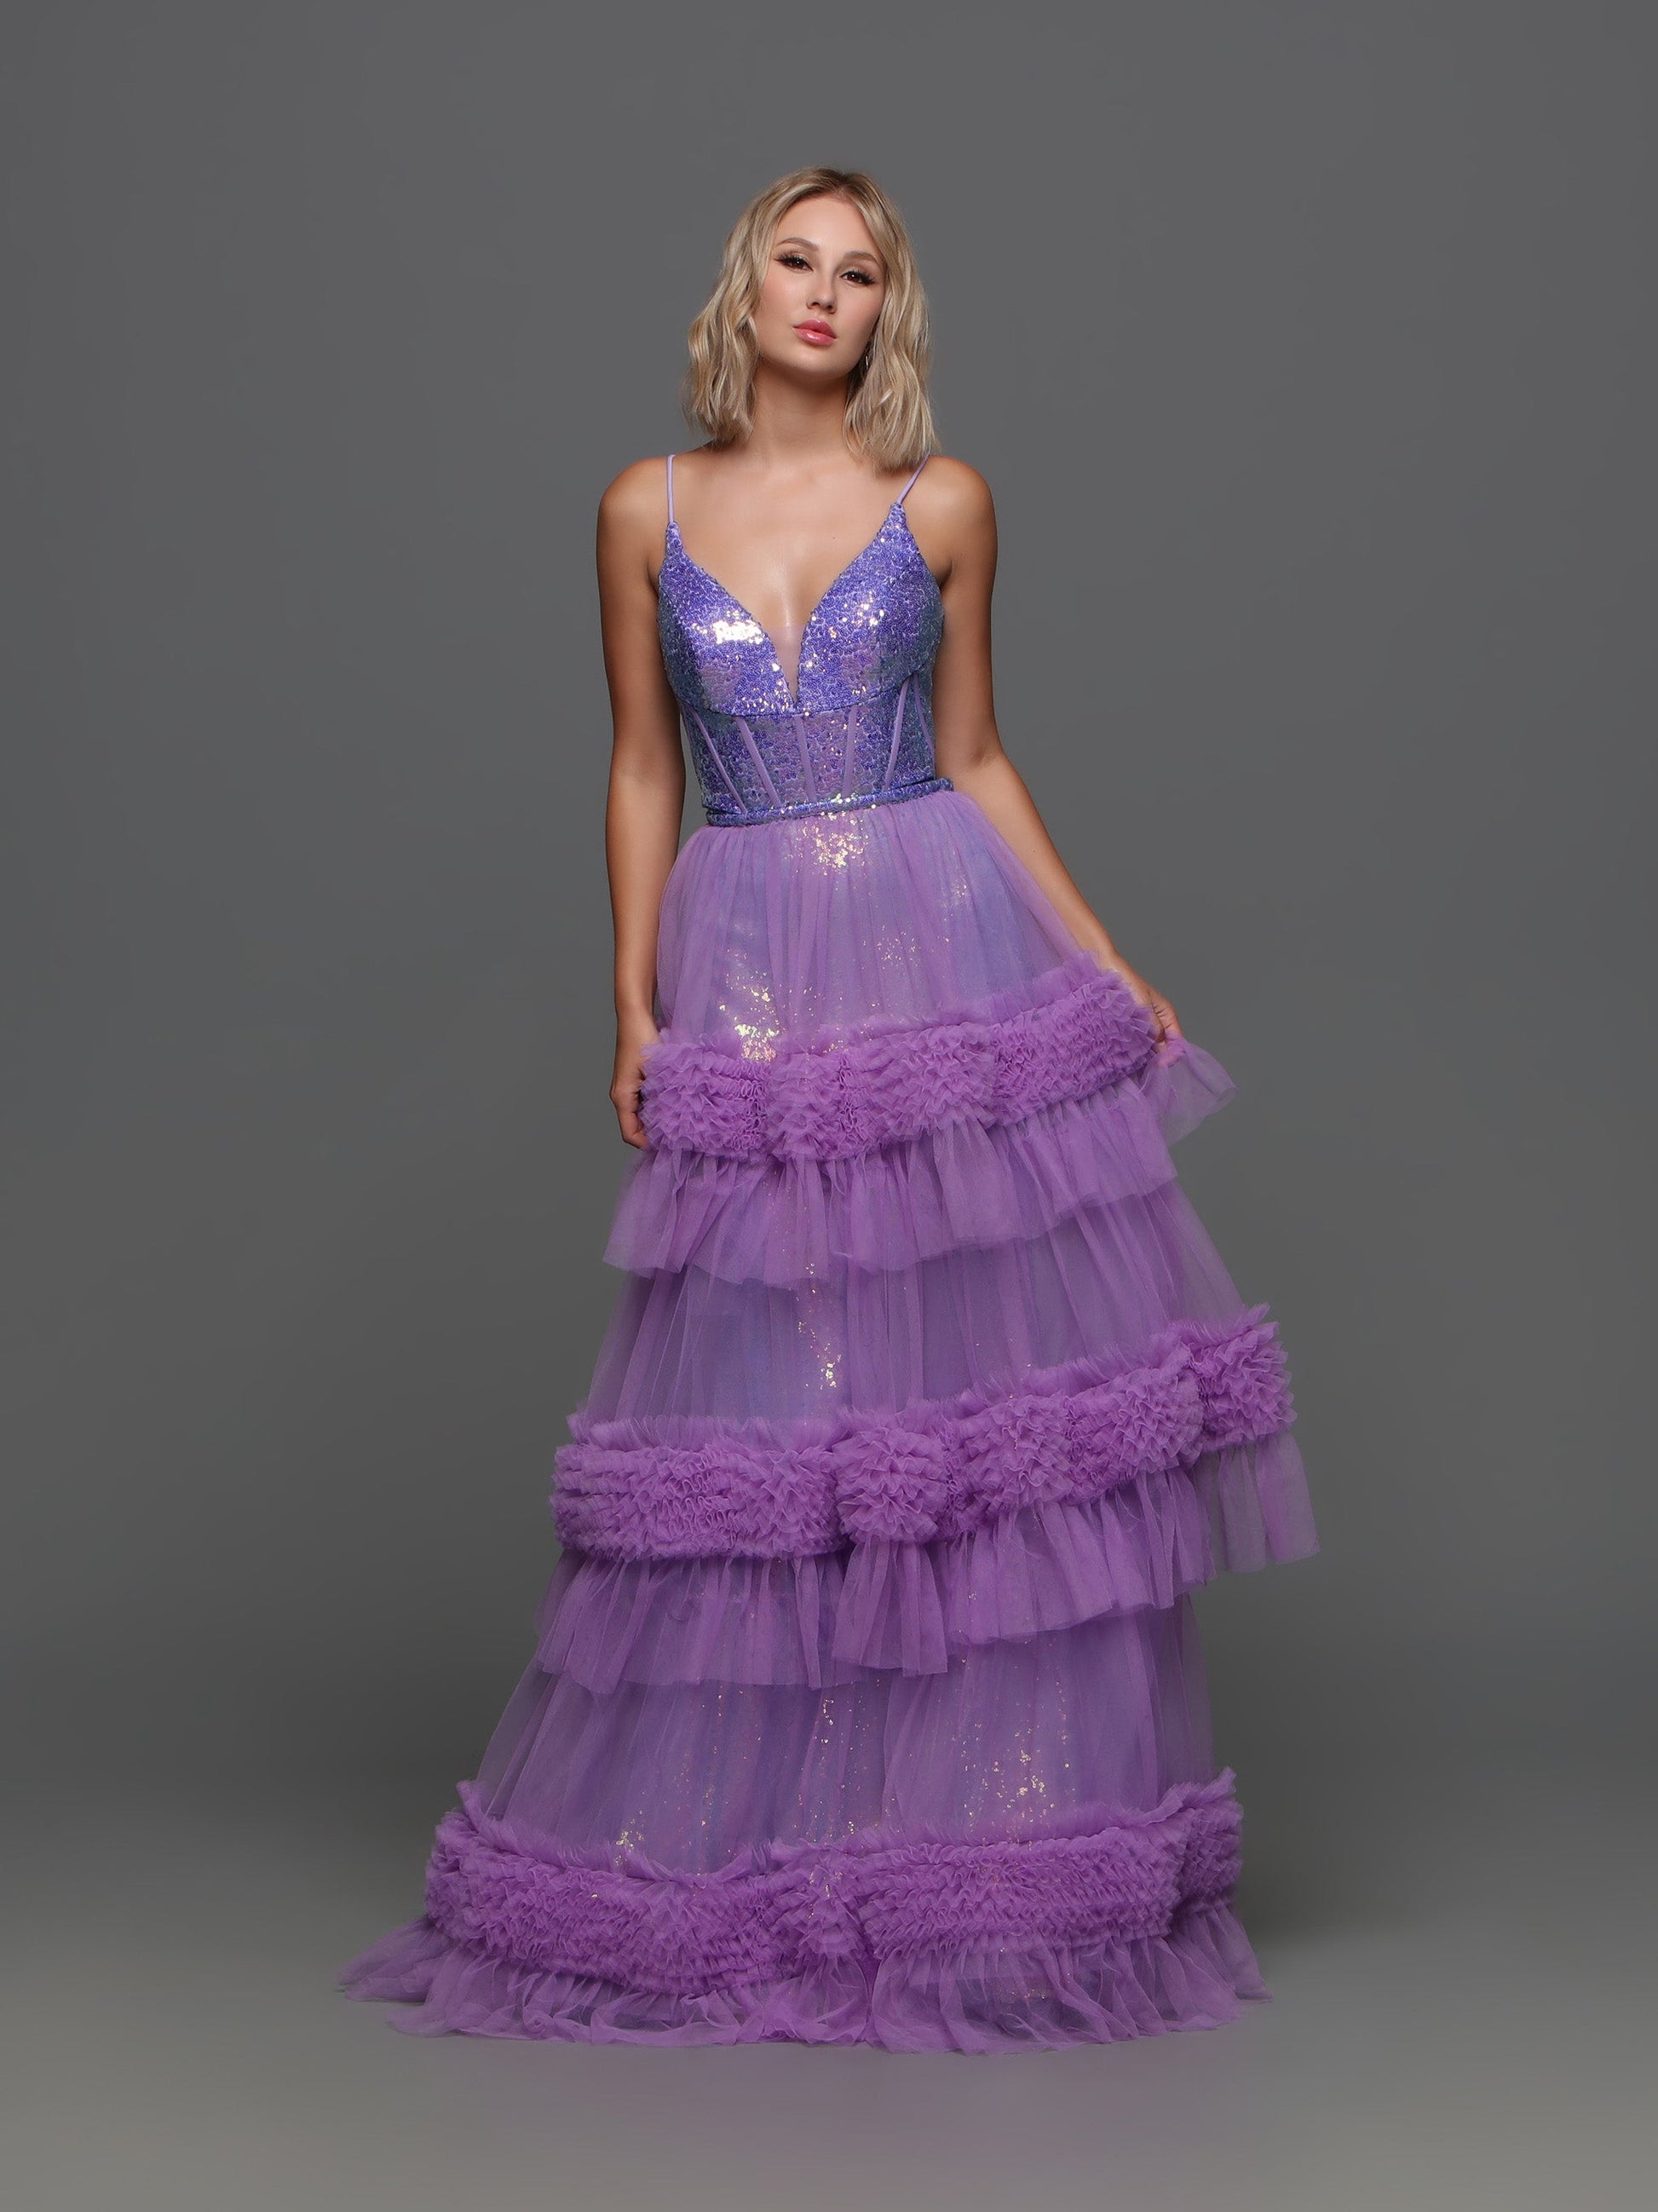 The Candice Wang 72377 Sequin V Neck Prom Dress features a fitted sequin silhouette with a stunning sequin V-neck corset bodice. The Detachable pleated tulle skirt adds layers for a full and luxurious look. Perfect for prom or any special occasion.  Sizes: 0-20  Colors: Purple, Pink